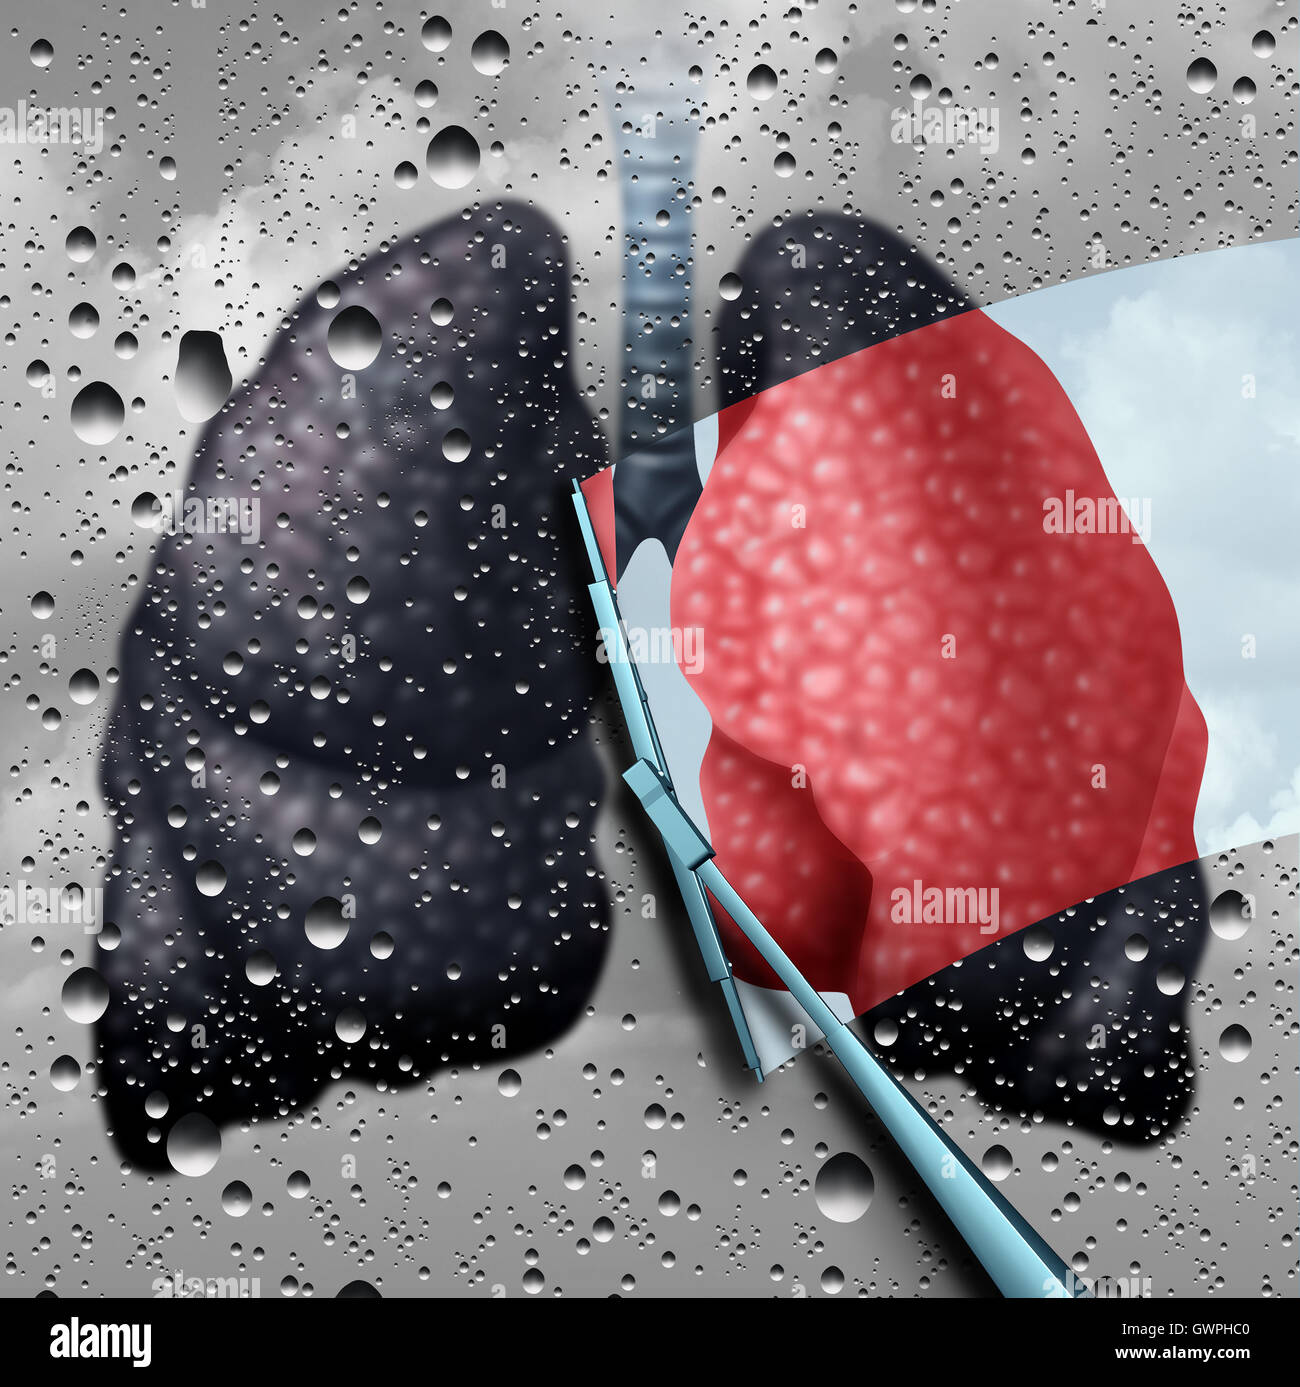 Lung health therapy medical concept as a sick human cardiovascular organ on a rainy window being wiped clean of disease and illness by a wiper as a metaphor for diseases of the lungs solution and asthma treatment with 3D illustration elements. Stock Photo